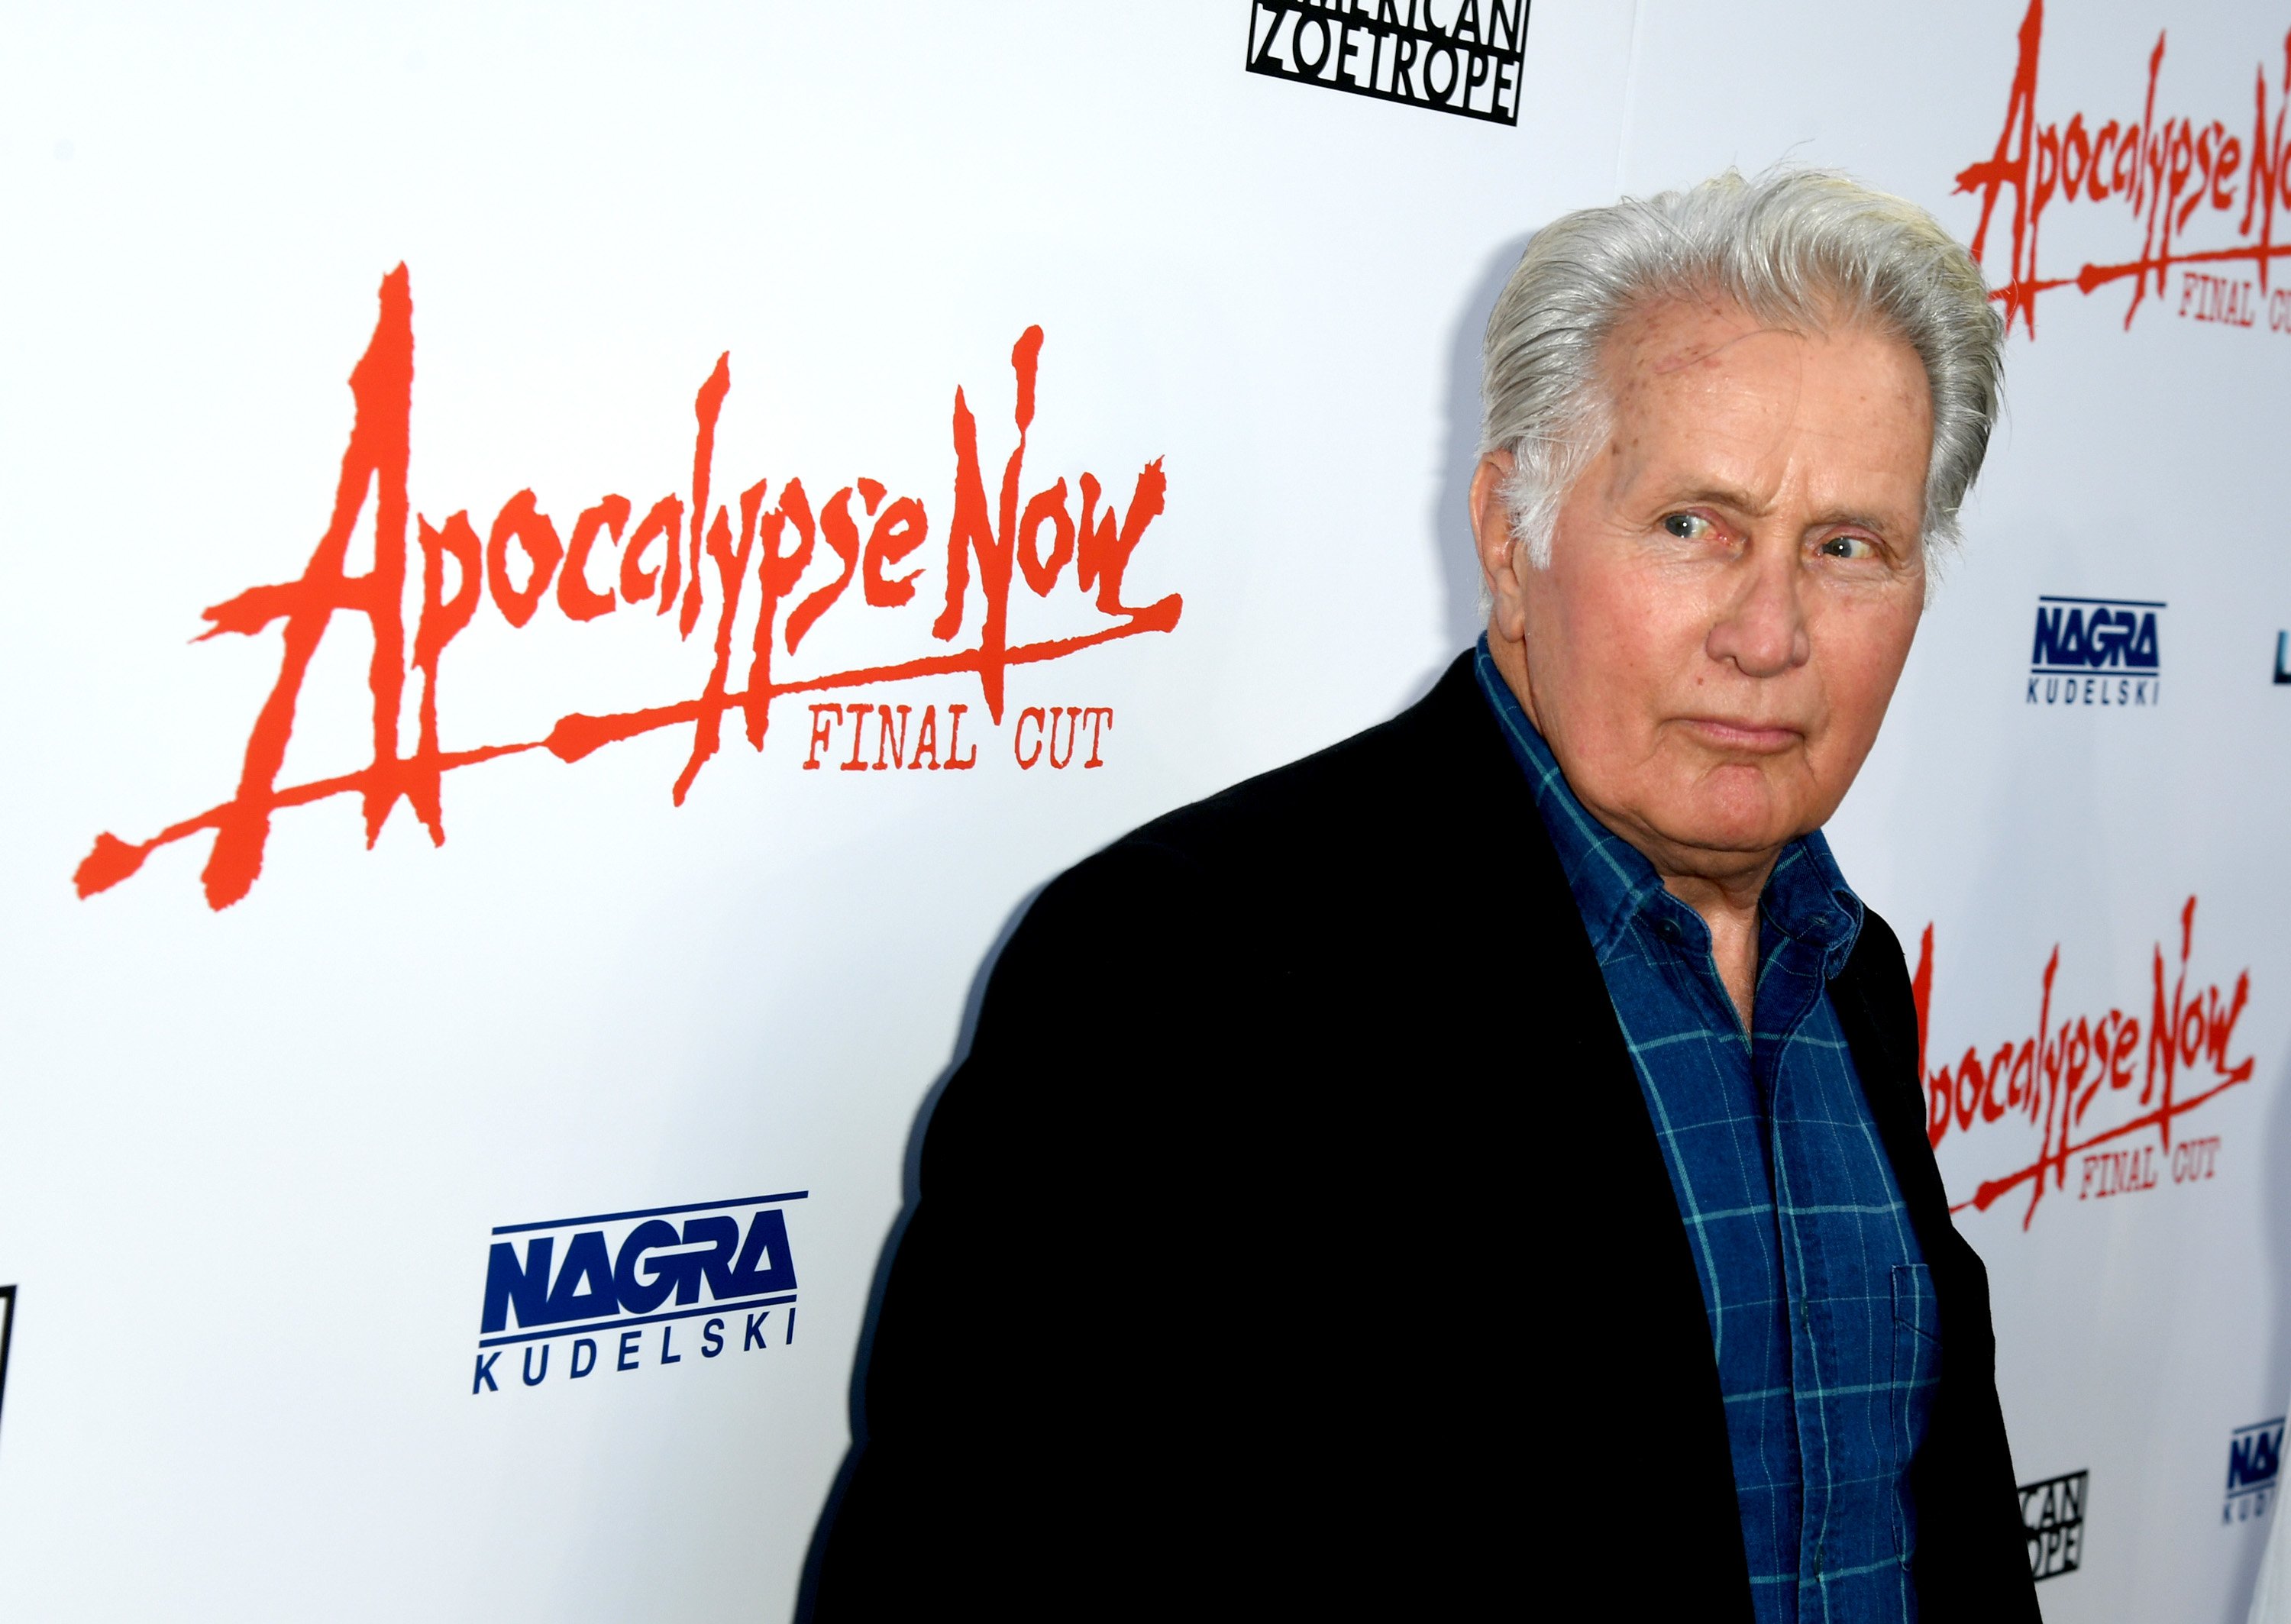 Martin Sheen arrives at the Premiere of Lionsgate's "Apocalypse Now Final Cut" at Arc Light Cinerama Dome on August 12, 2019 in Hollywood, California. | Source: Getty Images